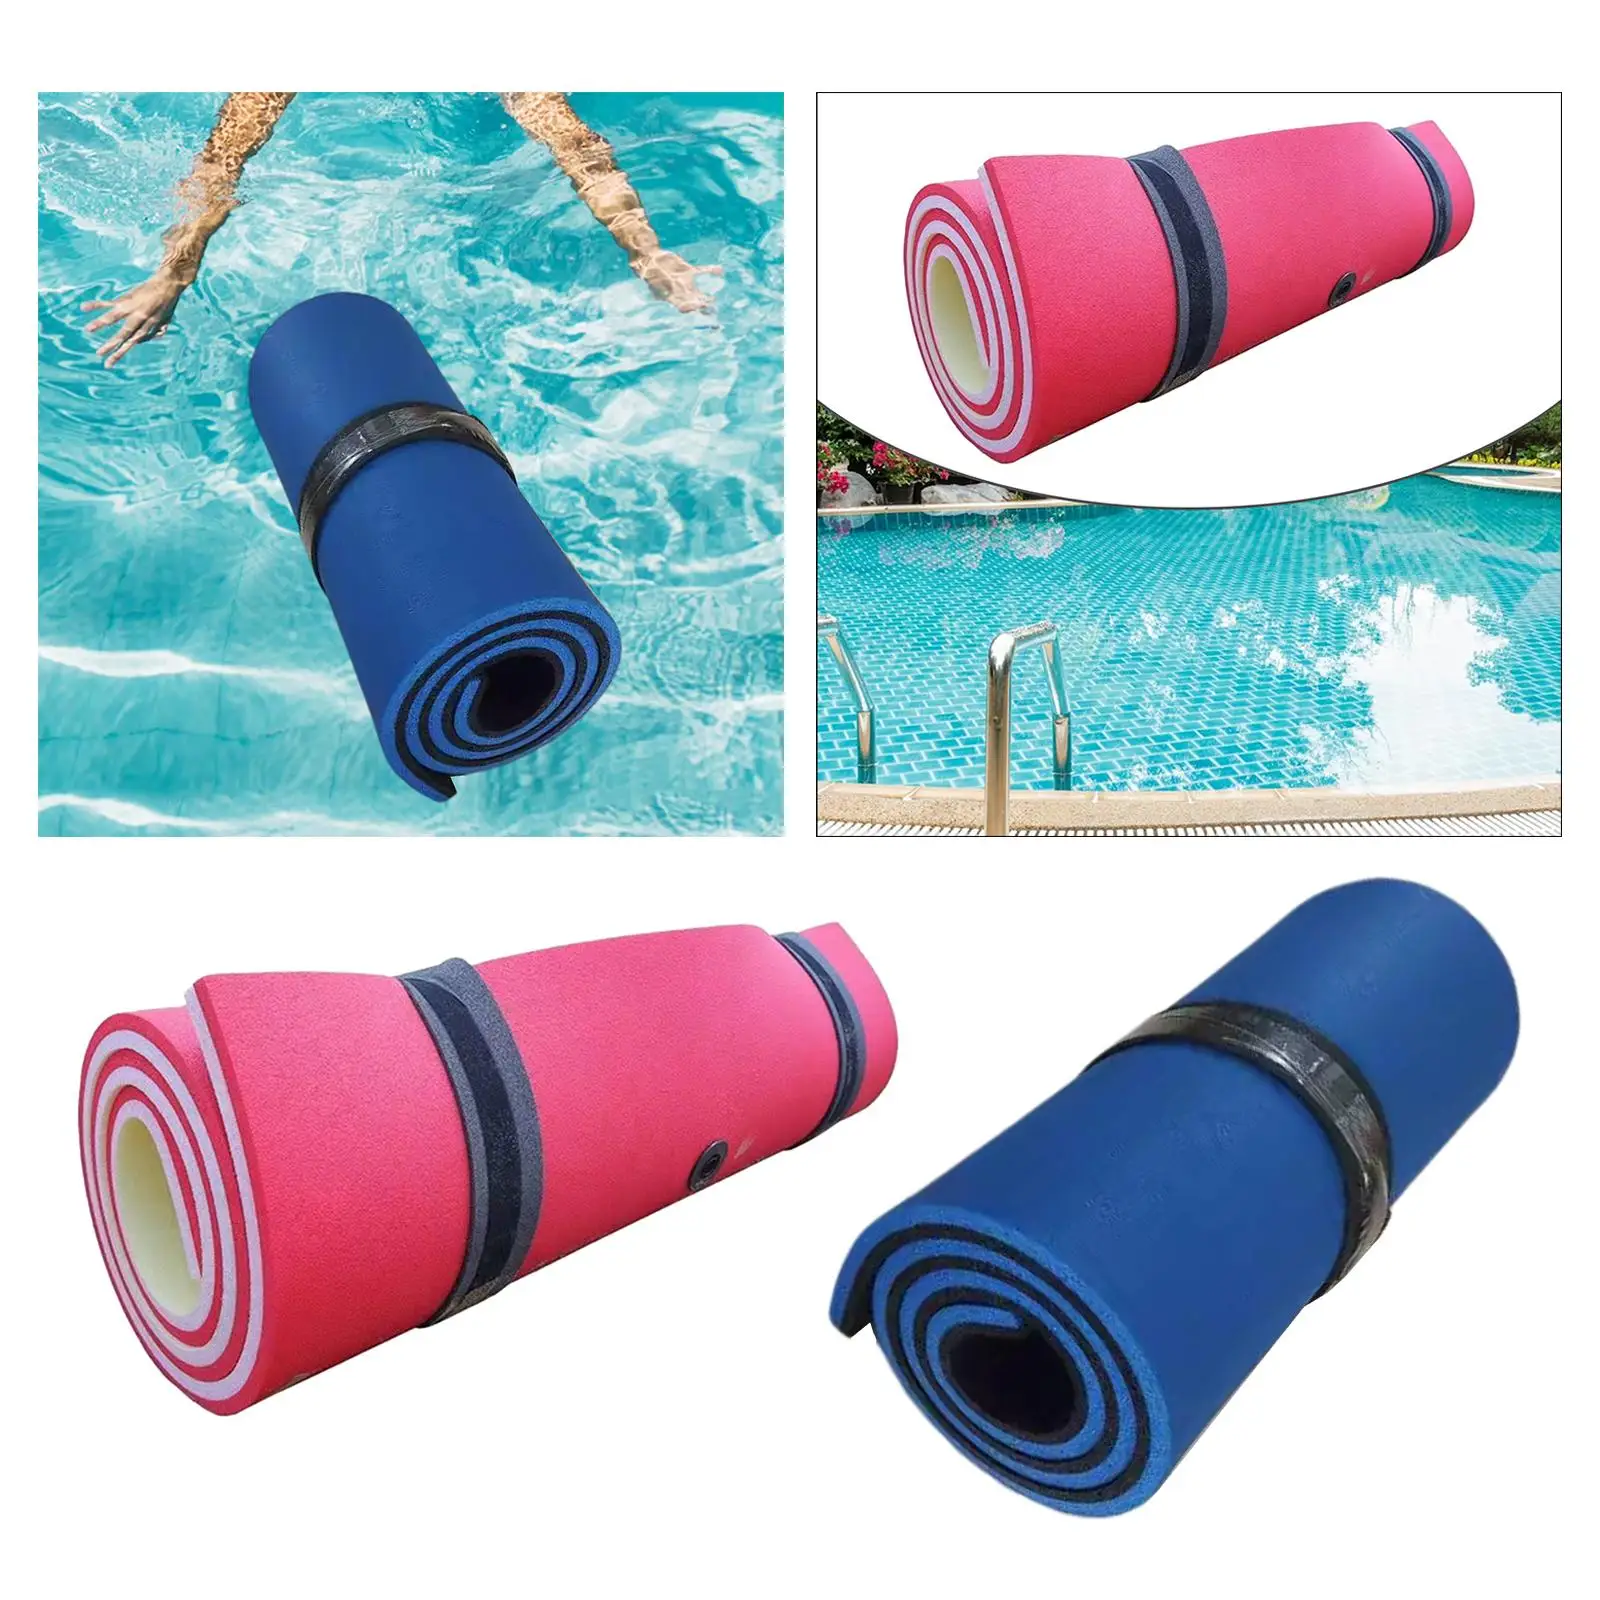 Water Floating Mat Roll up Mattress Pool Float Raft Adults Comfortable Float Blanket for Lake Outside Swimming Pool River Beach